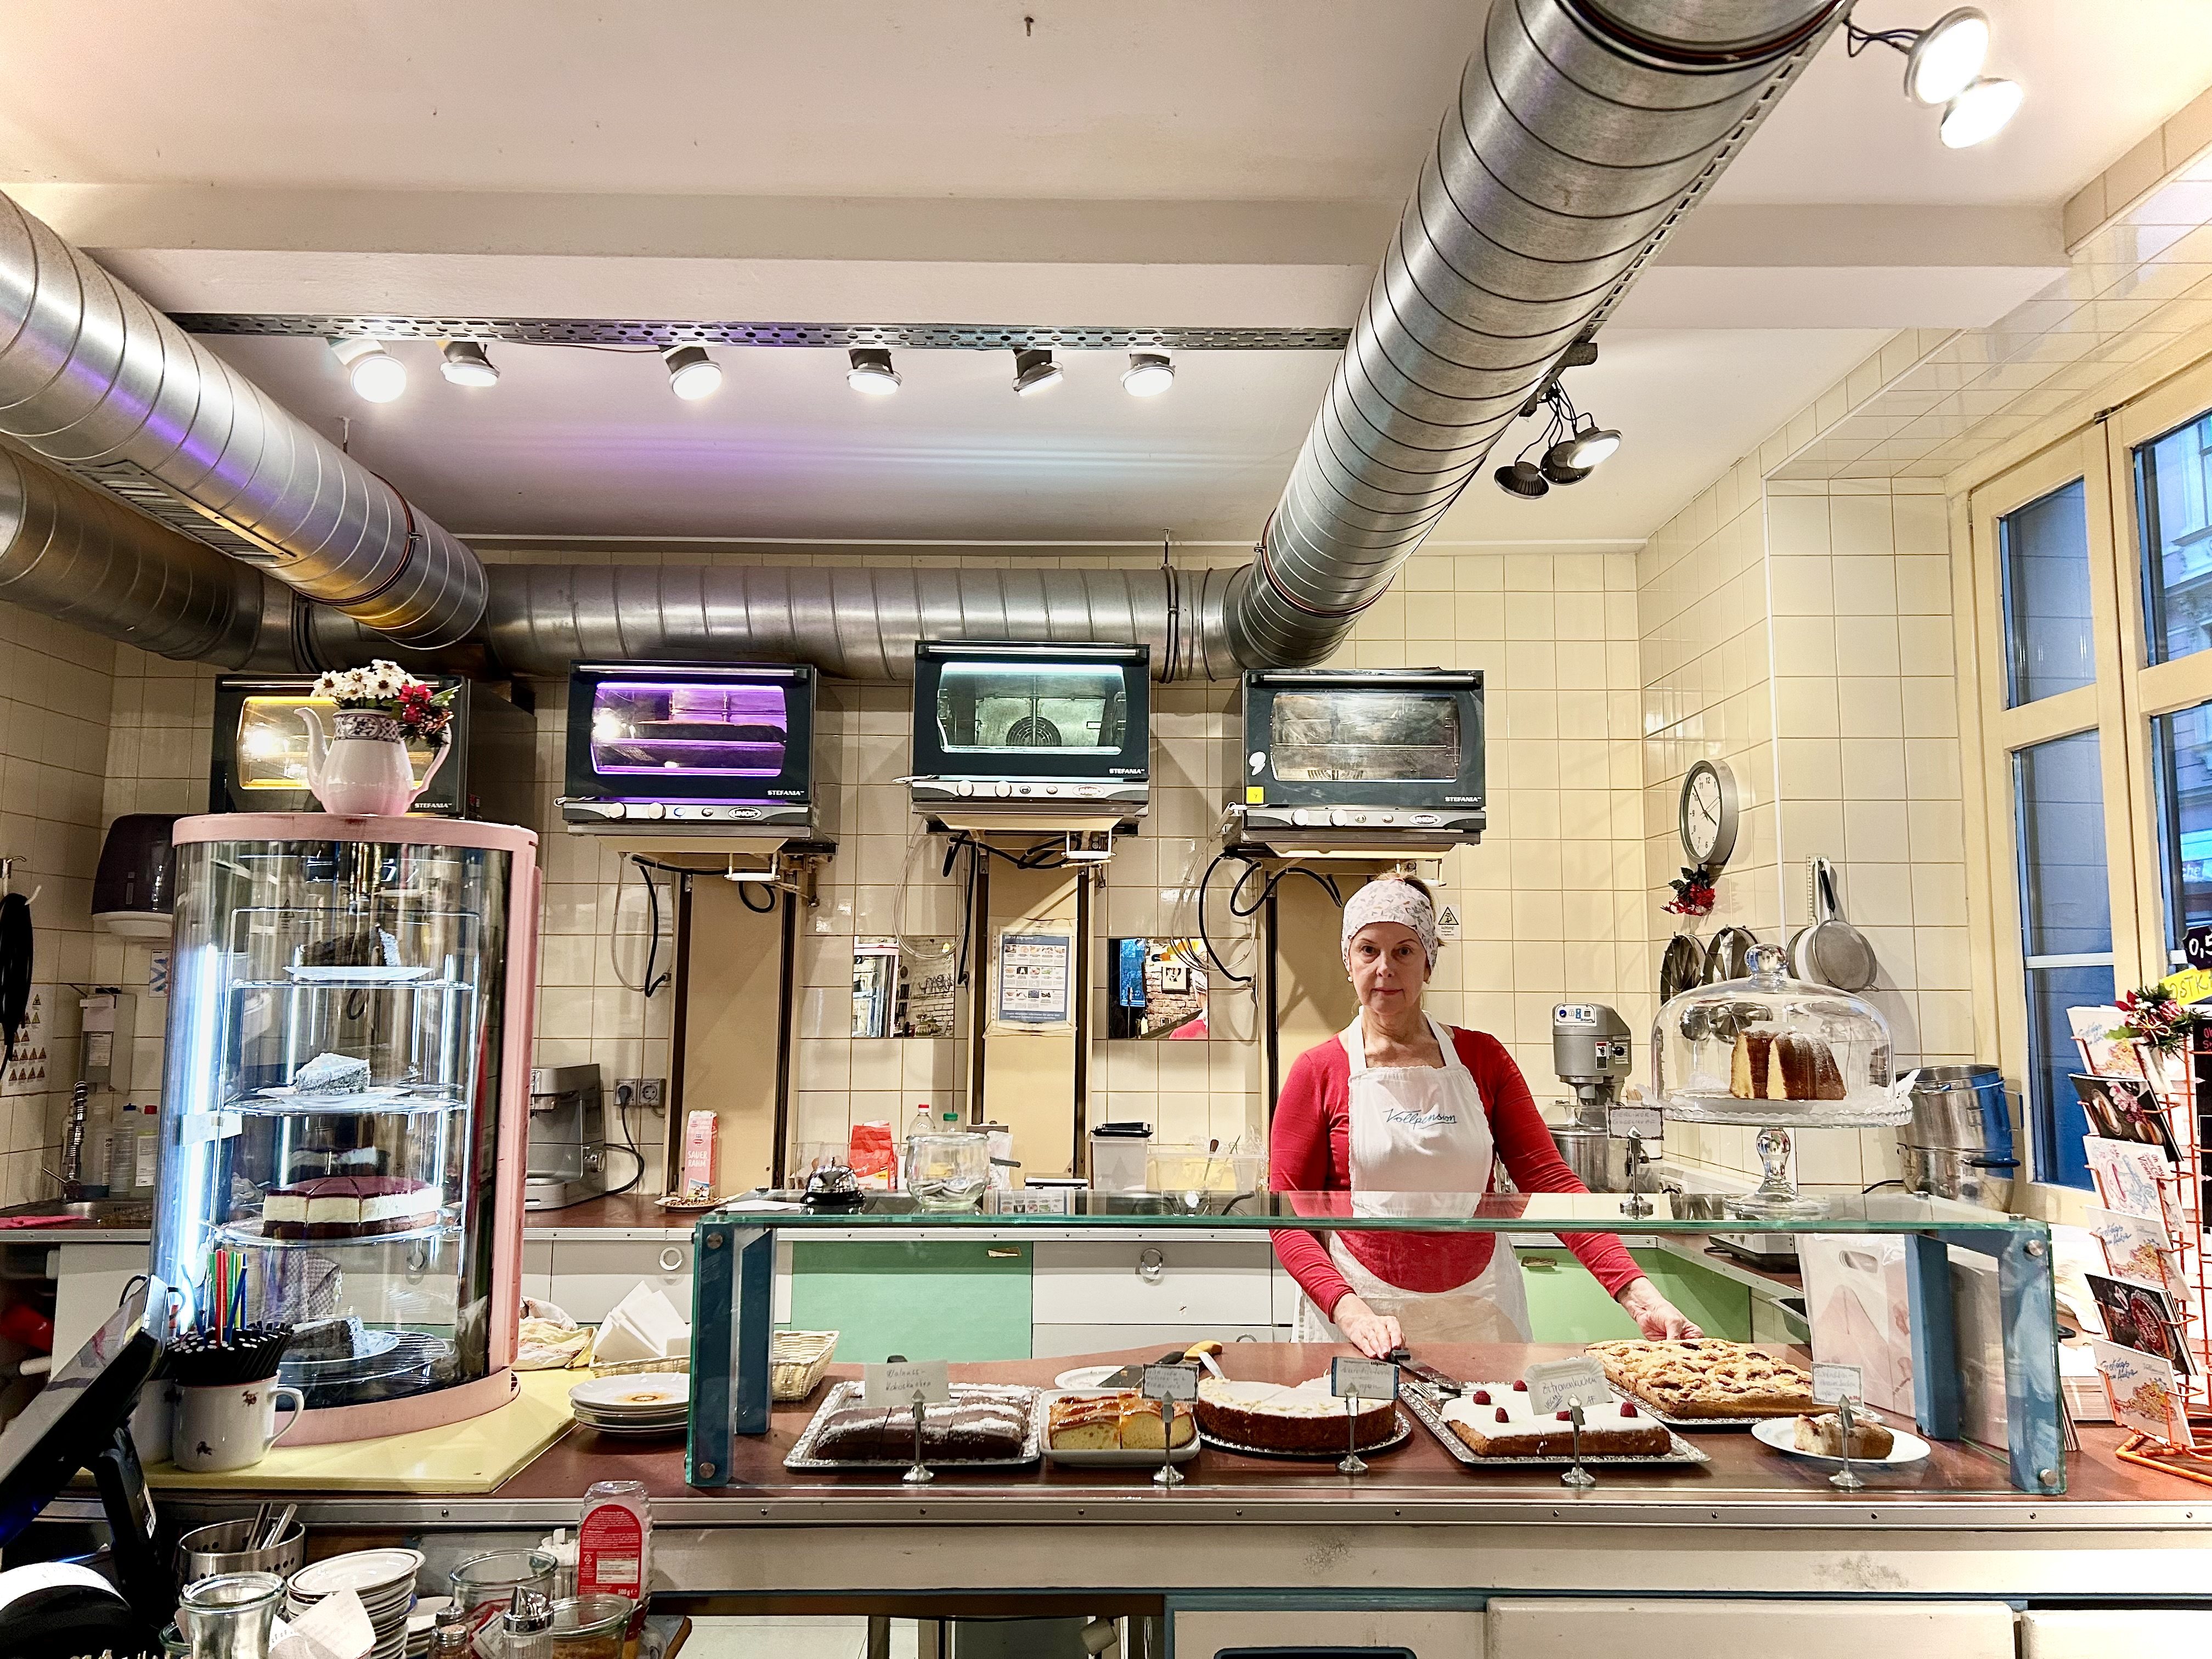 Staffed mostly with people above 60, the Vollpension Cafe in Vienna, Austria, offers homemade cakes and traditional recipes in a setting that feels like a grandparents’ living room. Photo: Shoaib Shafi